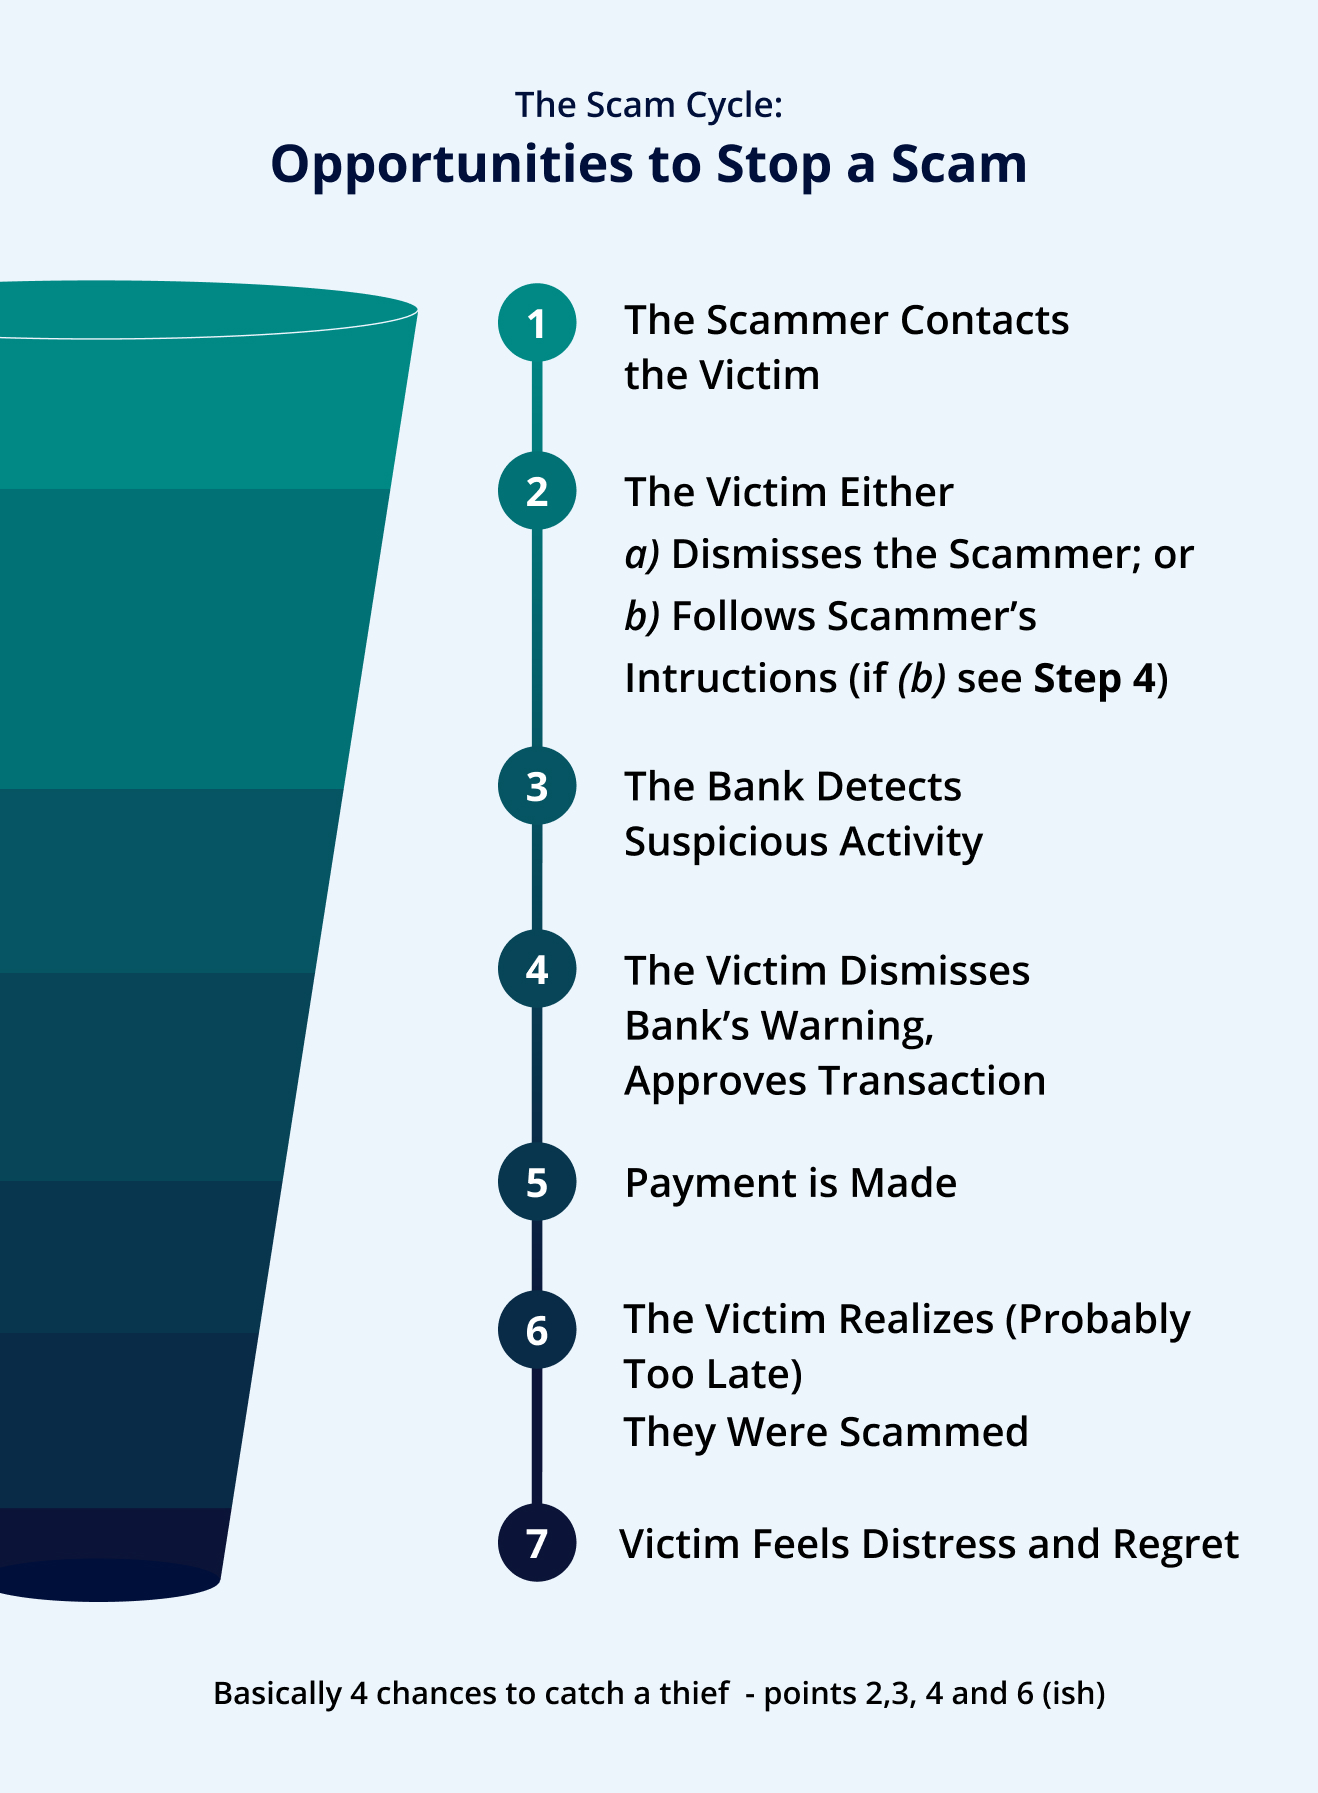 Illustration of the scam cycle and the different opportunities banks have to stop a scam loss